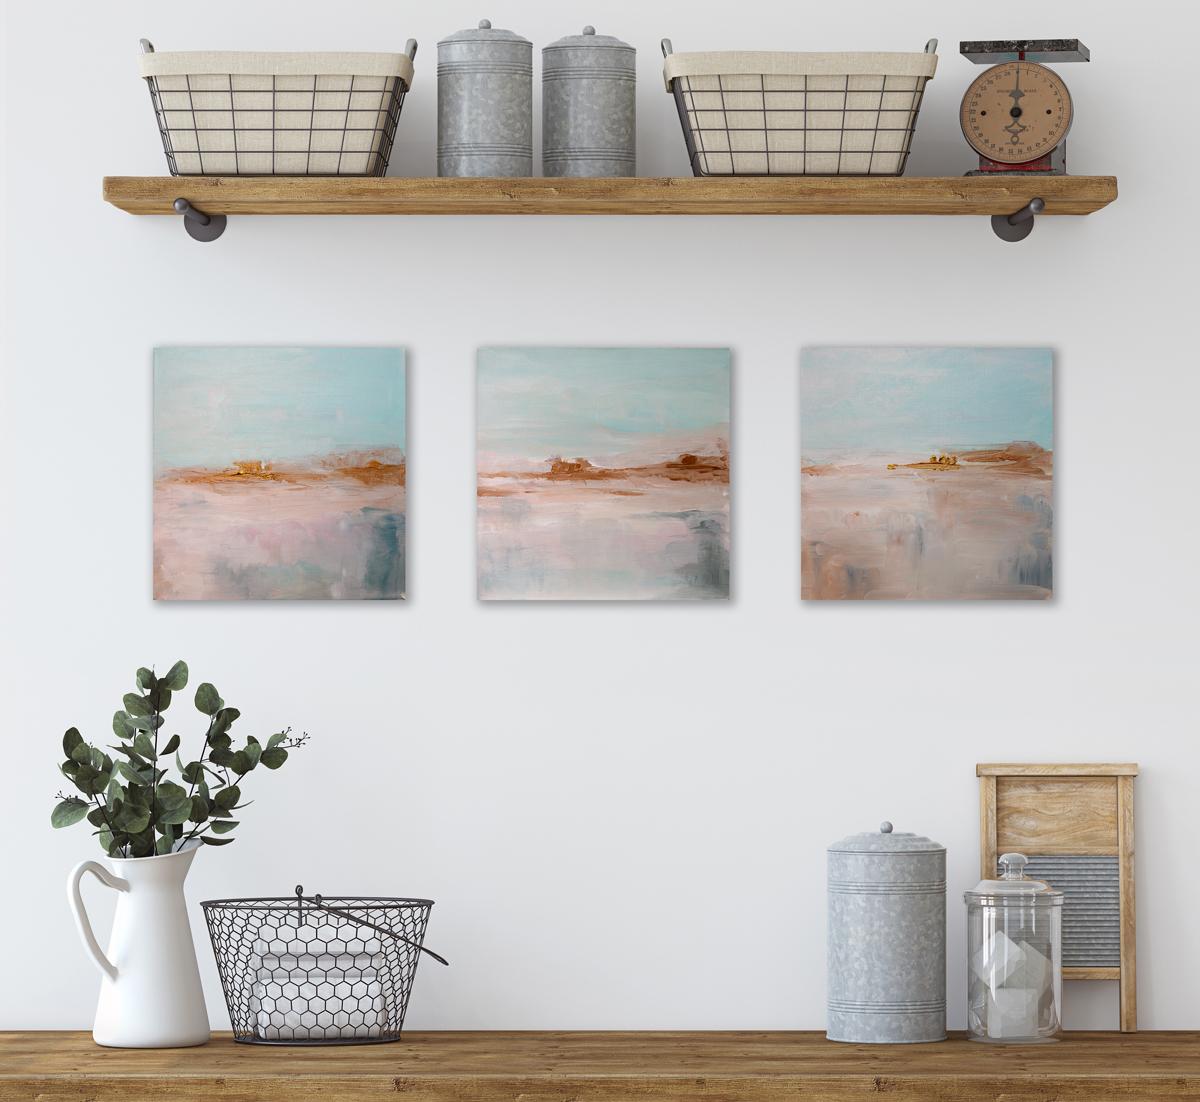 This small abstract painting by Dolores Tema features a warm copper and pink-toned palette with light teal blue and grey hues in the bottom right-hand corner. The piece follows an almost landscape composition, with a loose horizon line created by